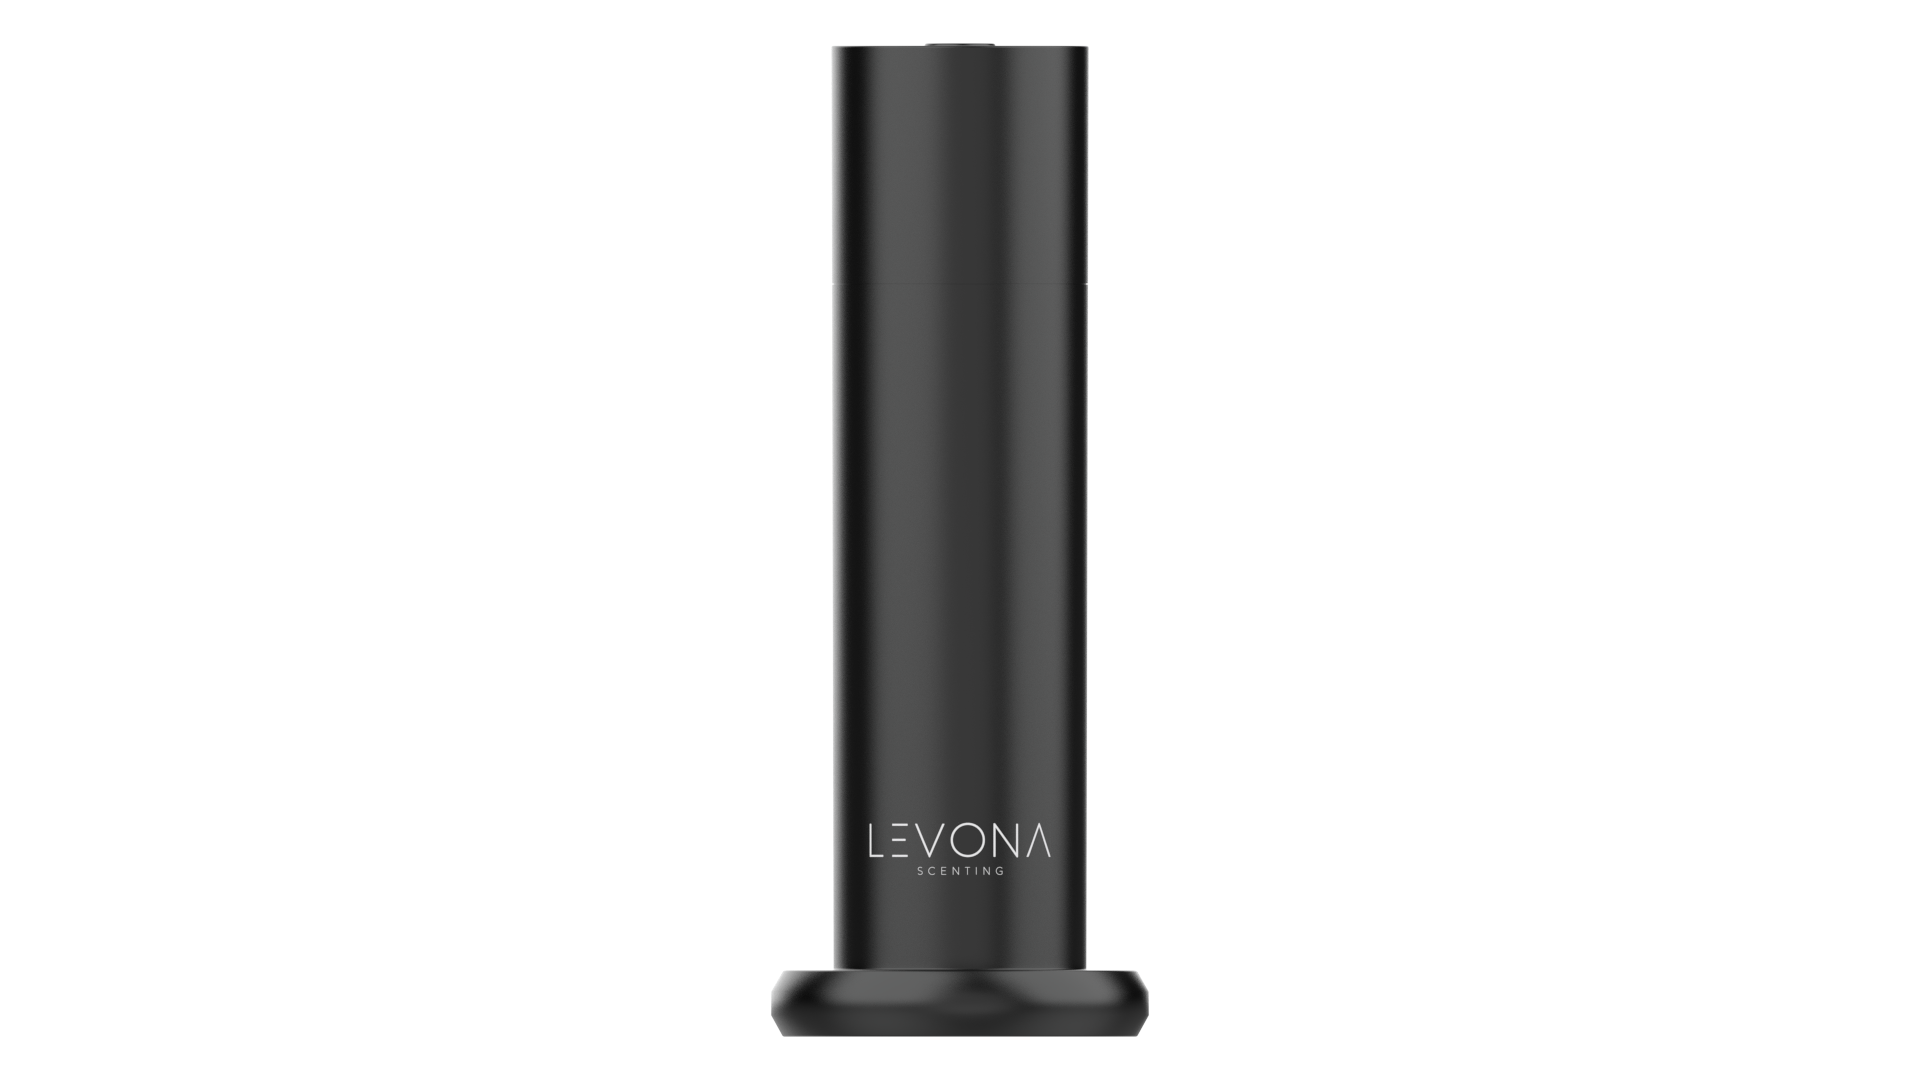 Levona Scent Essential Oils For Diffusers For Home: Hotel and Home Luxury  Scents Oils For Diffuser - Rushing Rapids Scented Oil With Citrus Essential